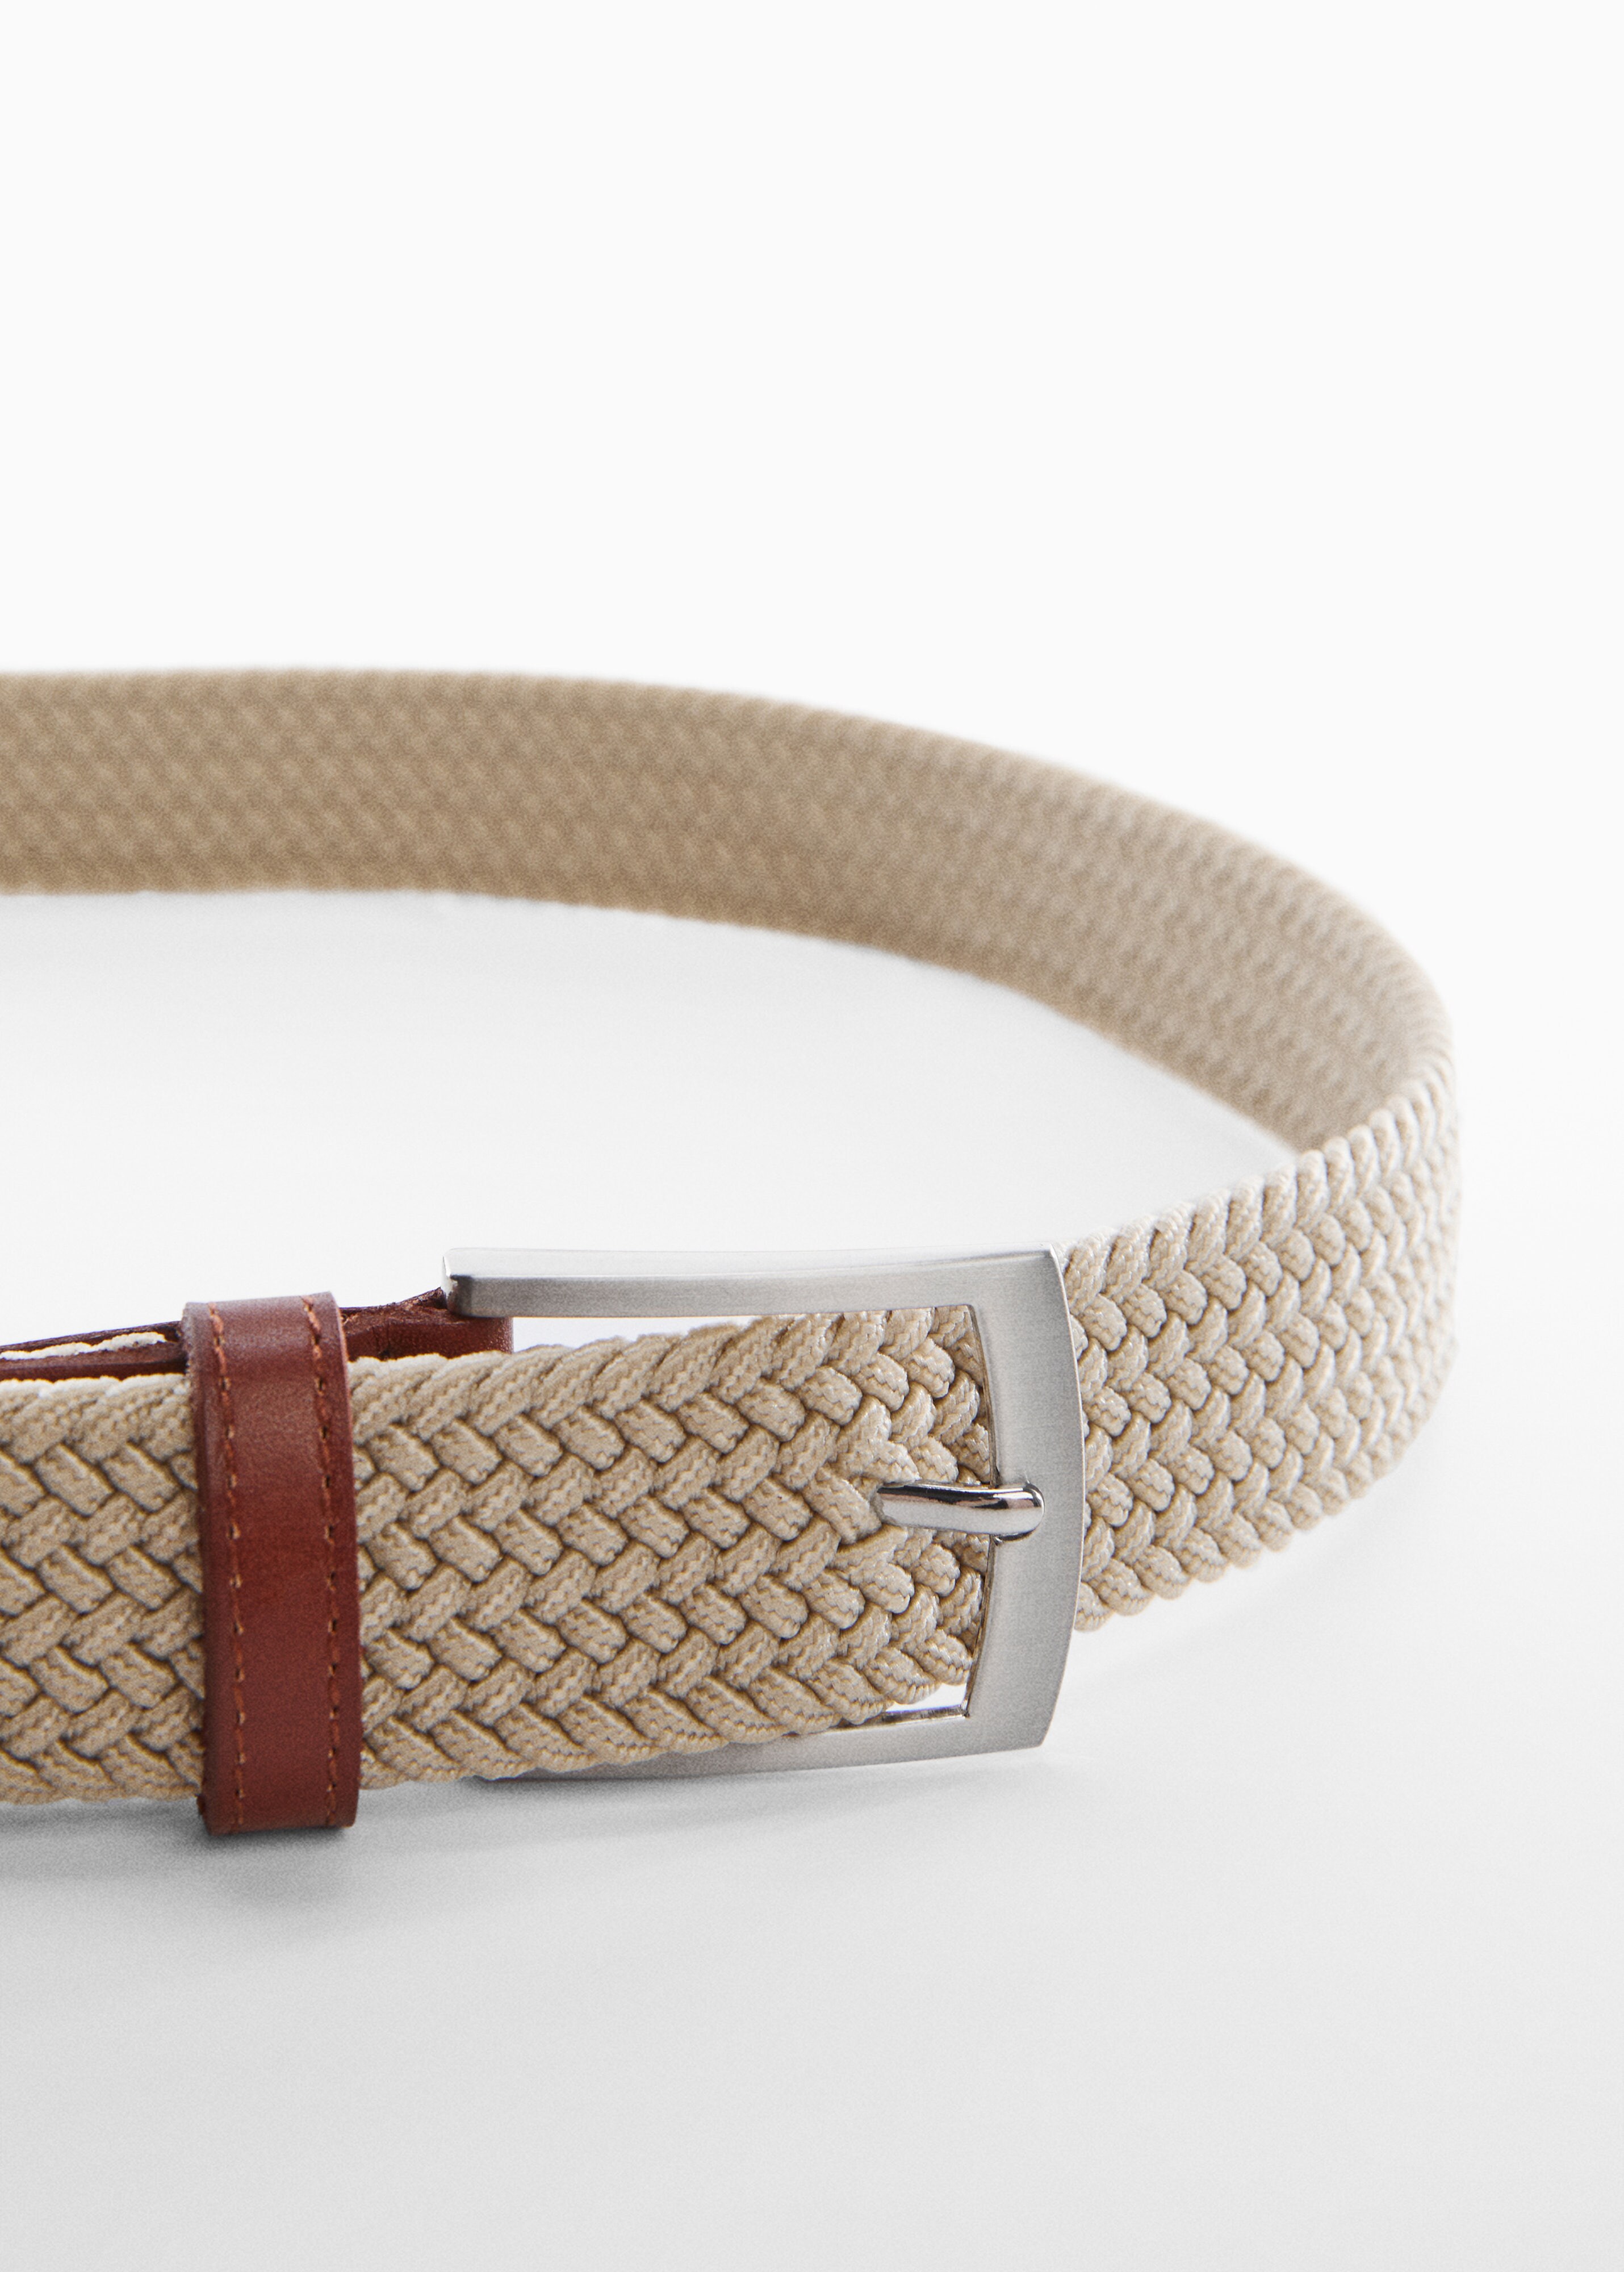 Braided elastic belt - Details of the article 2